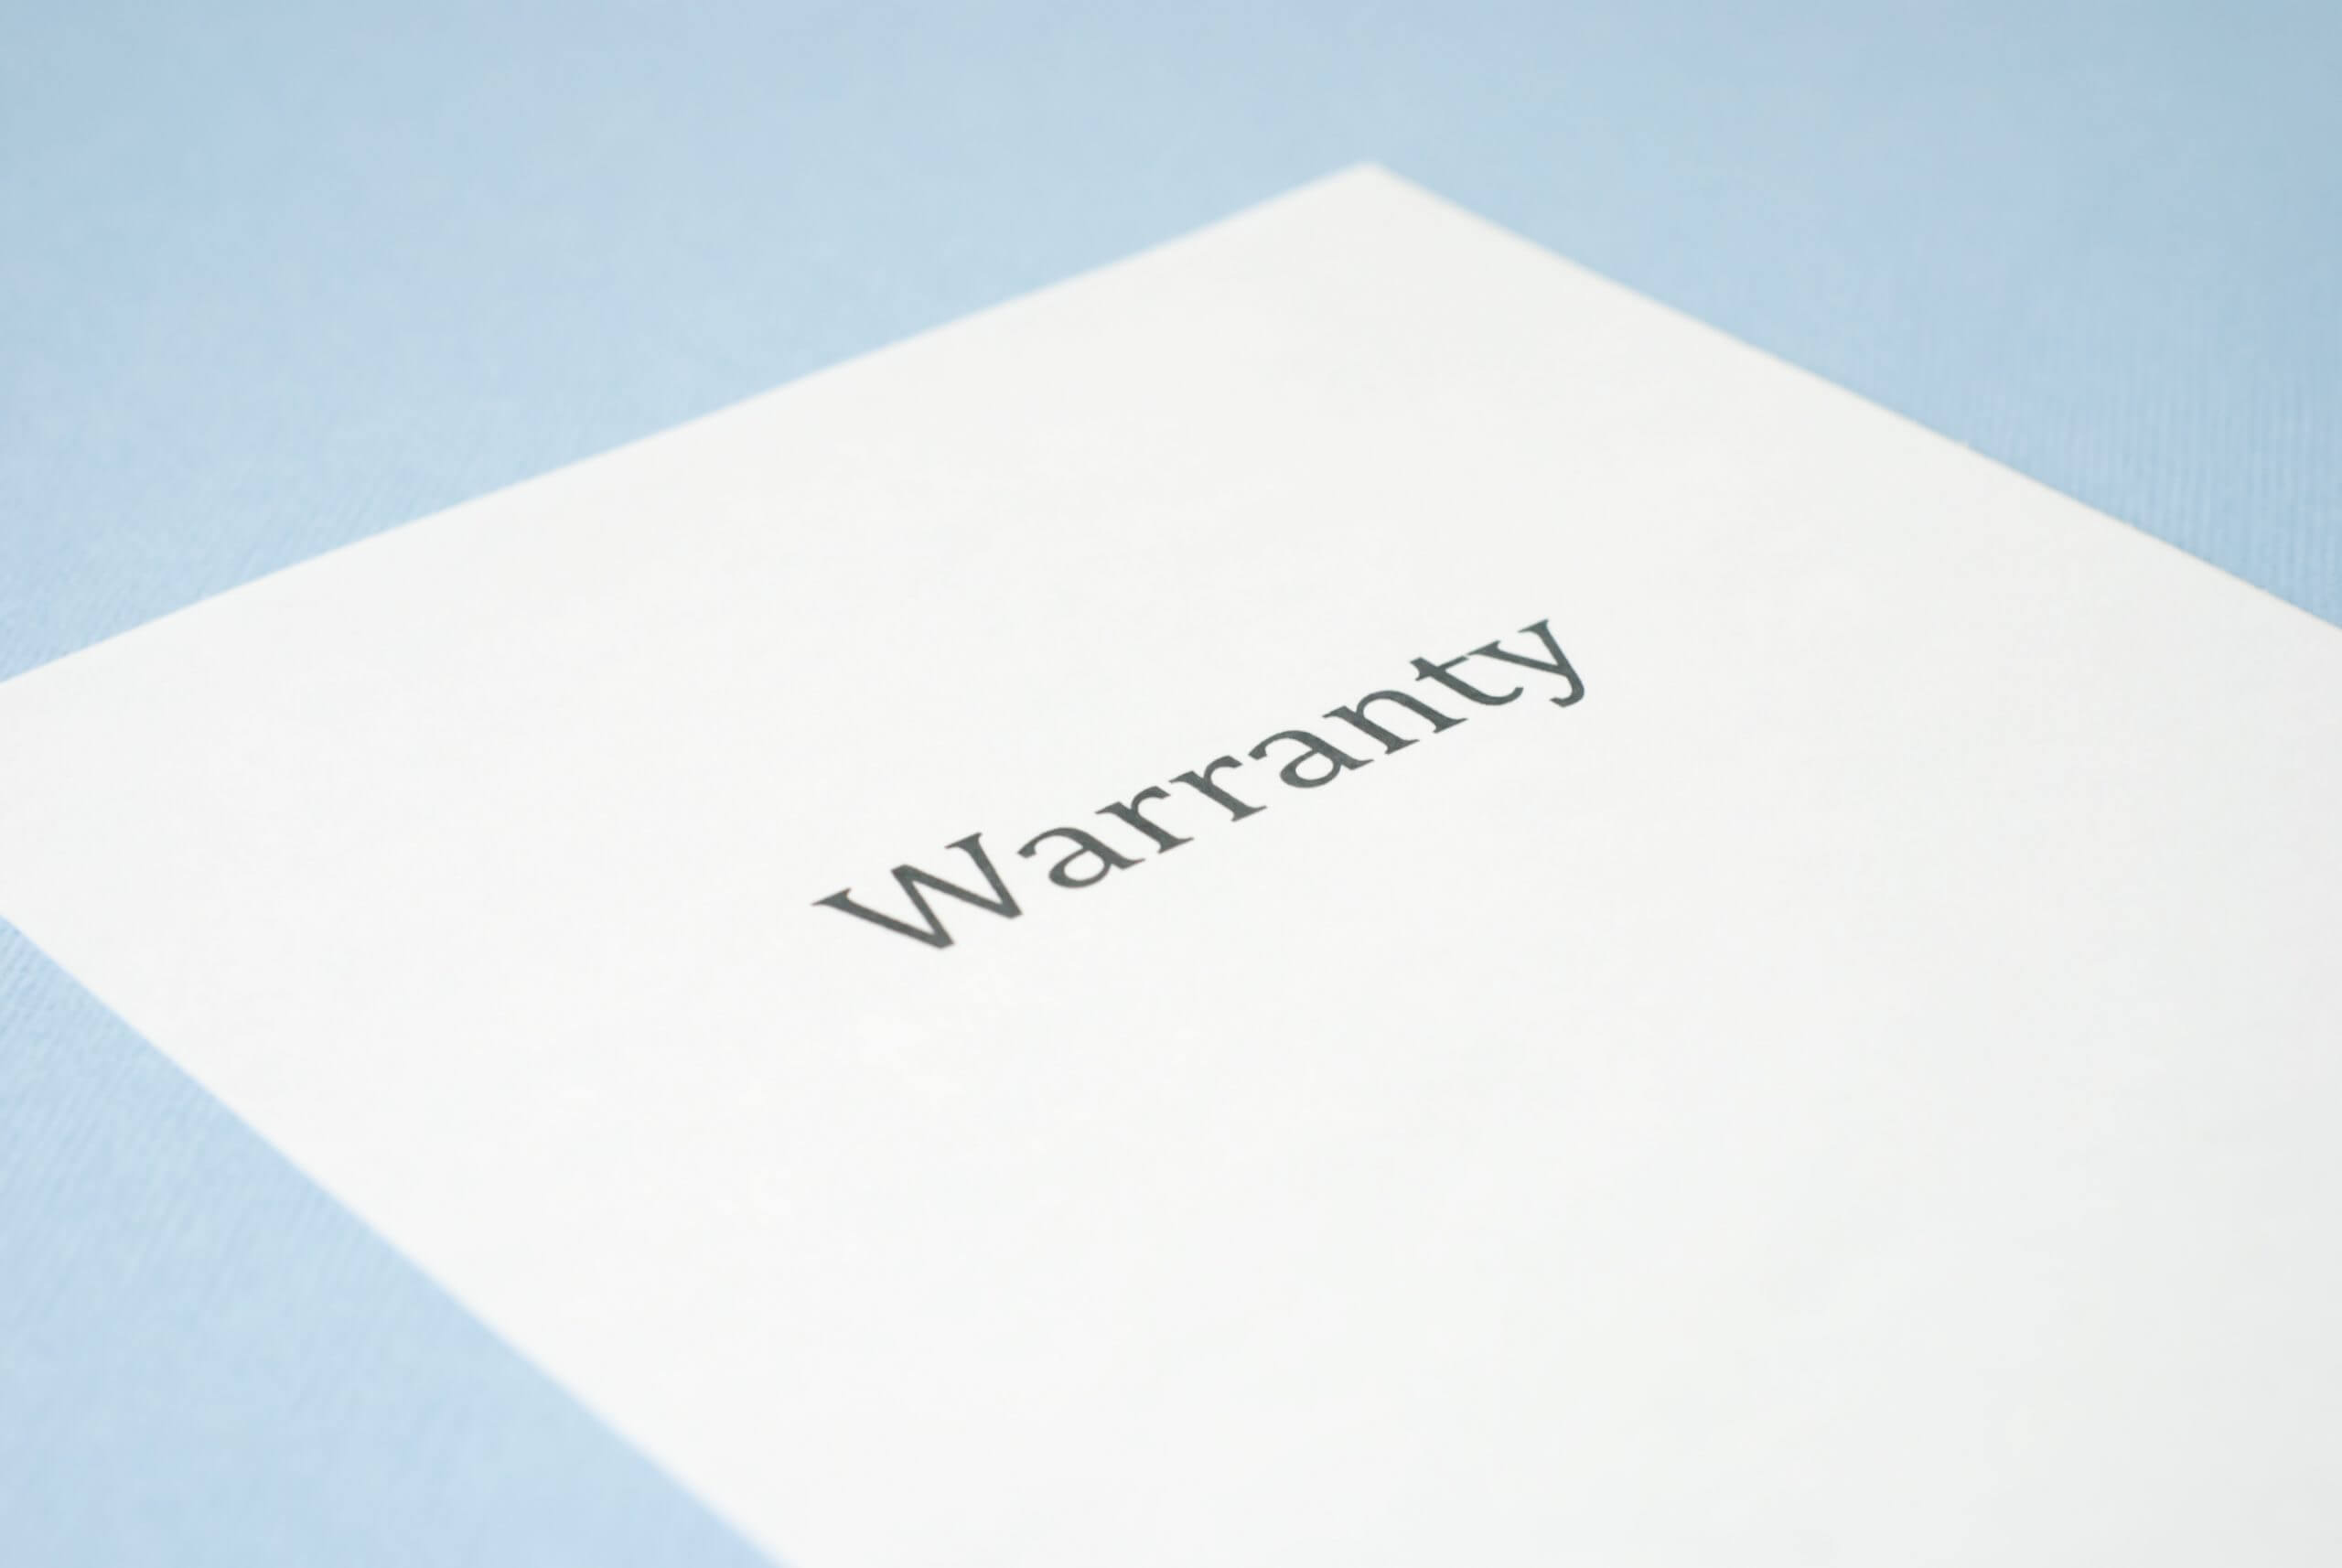 warranty printed on a paper